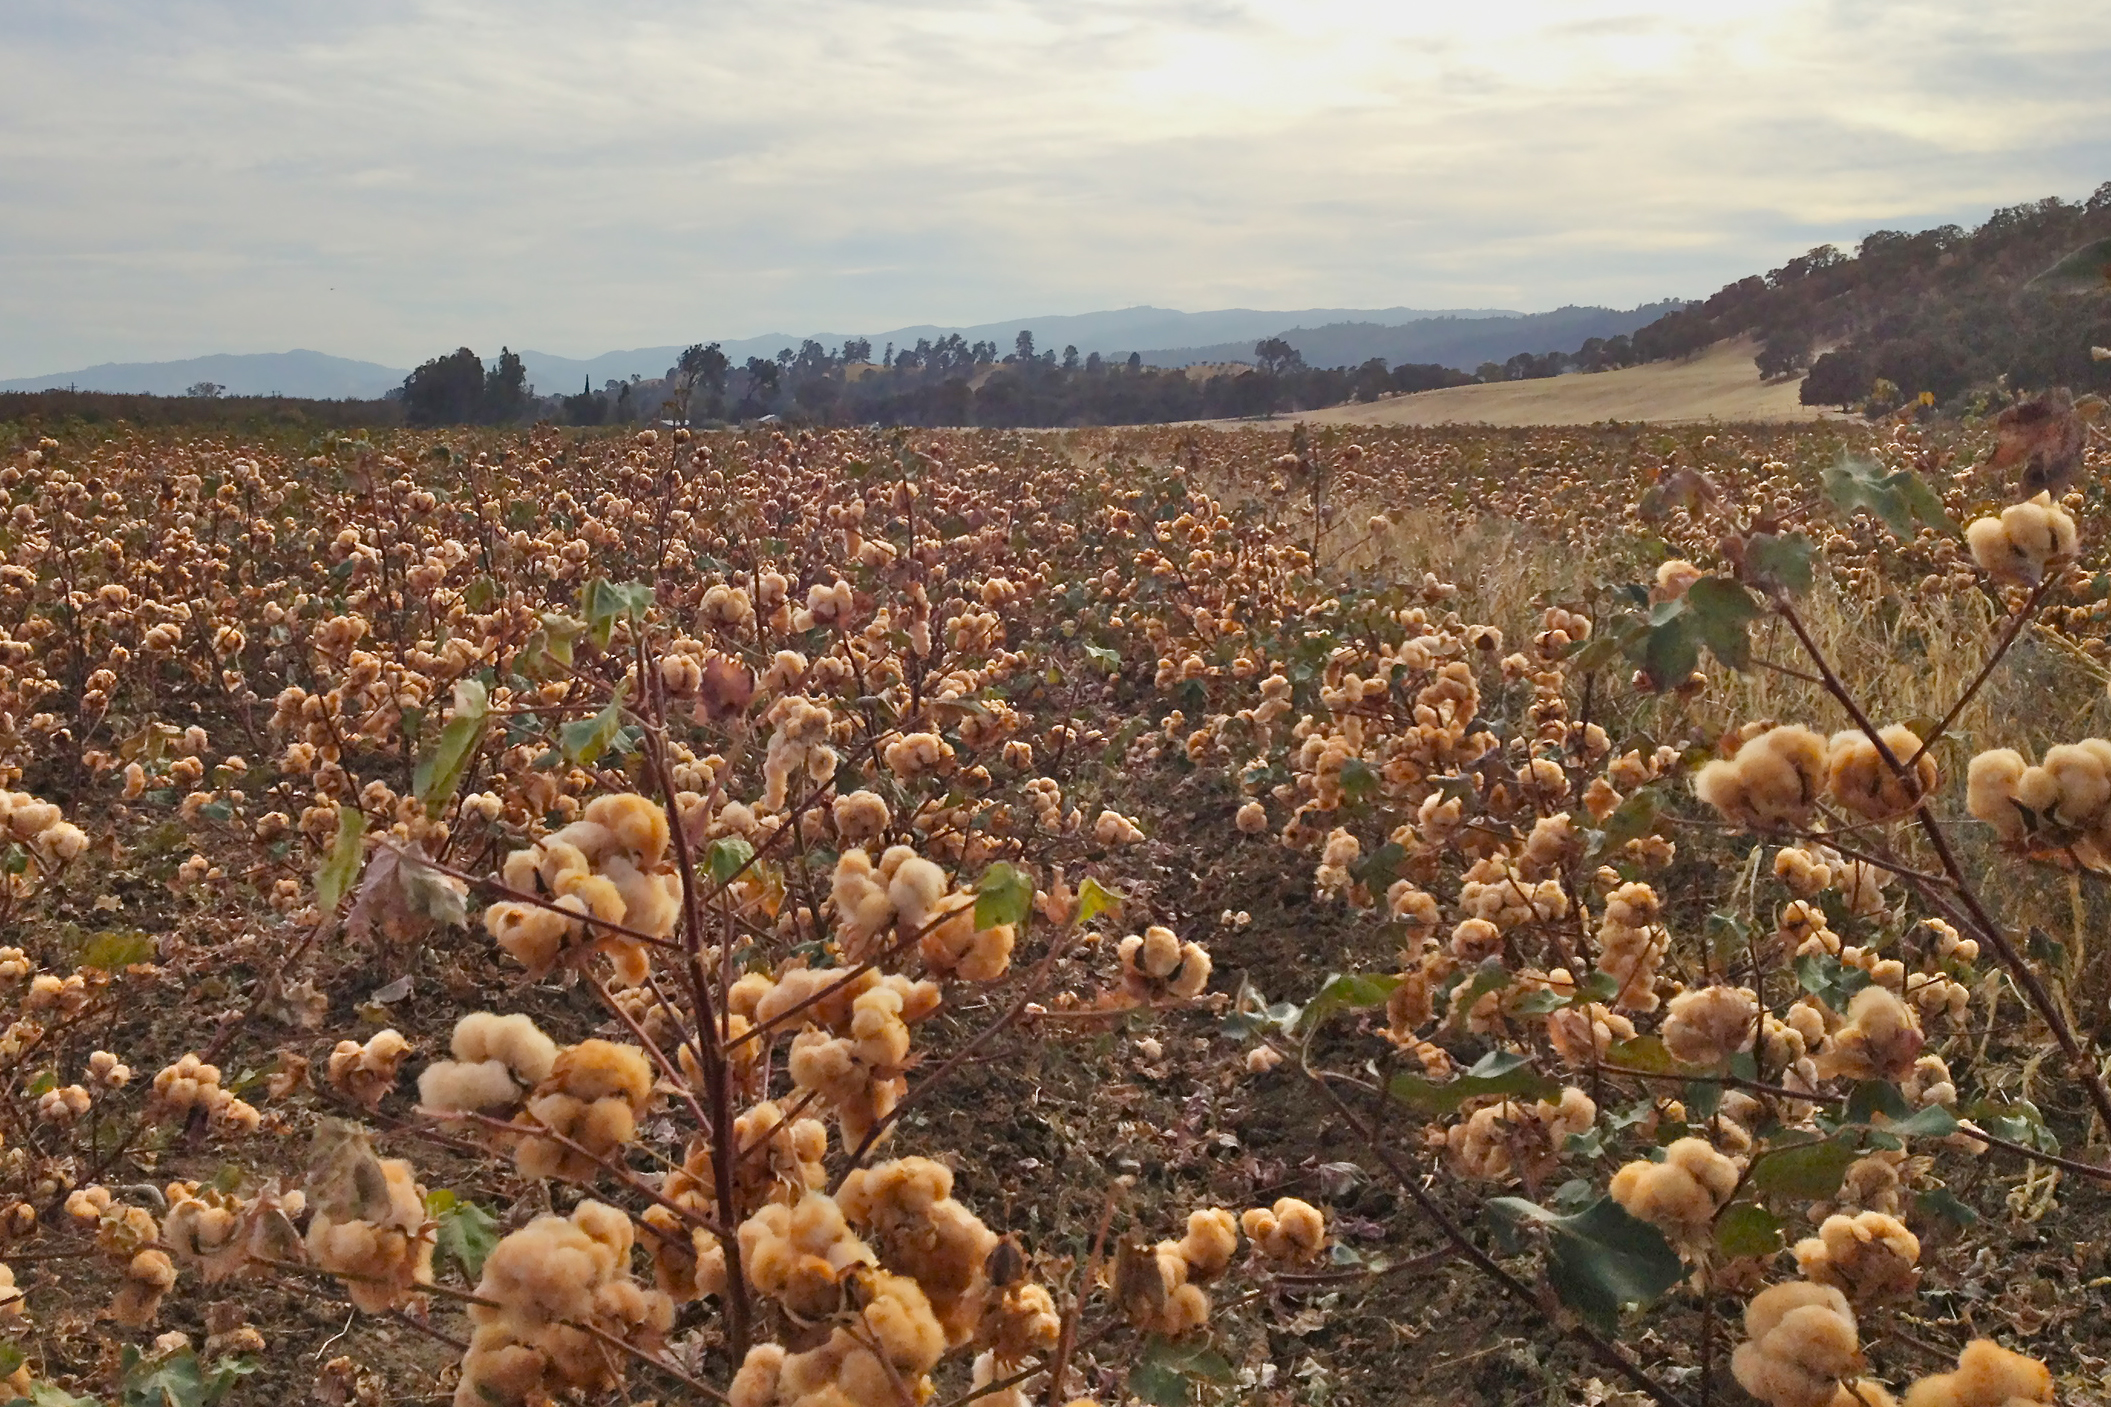 A cotton field with fluffy bolls, under a hazy sky, with distant hills.